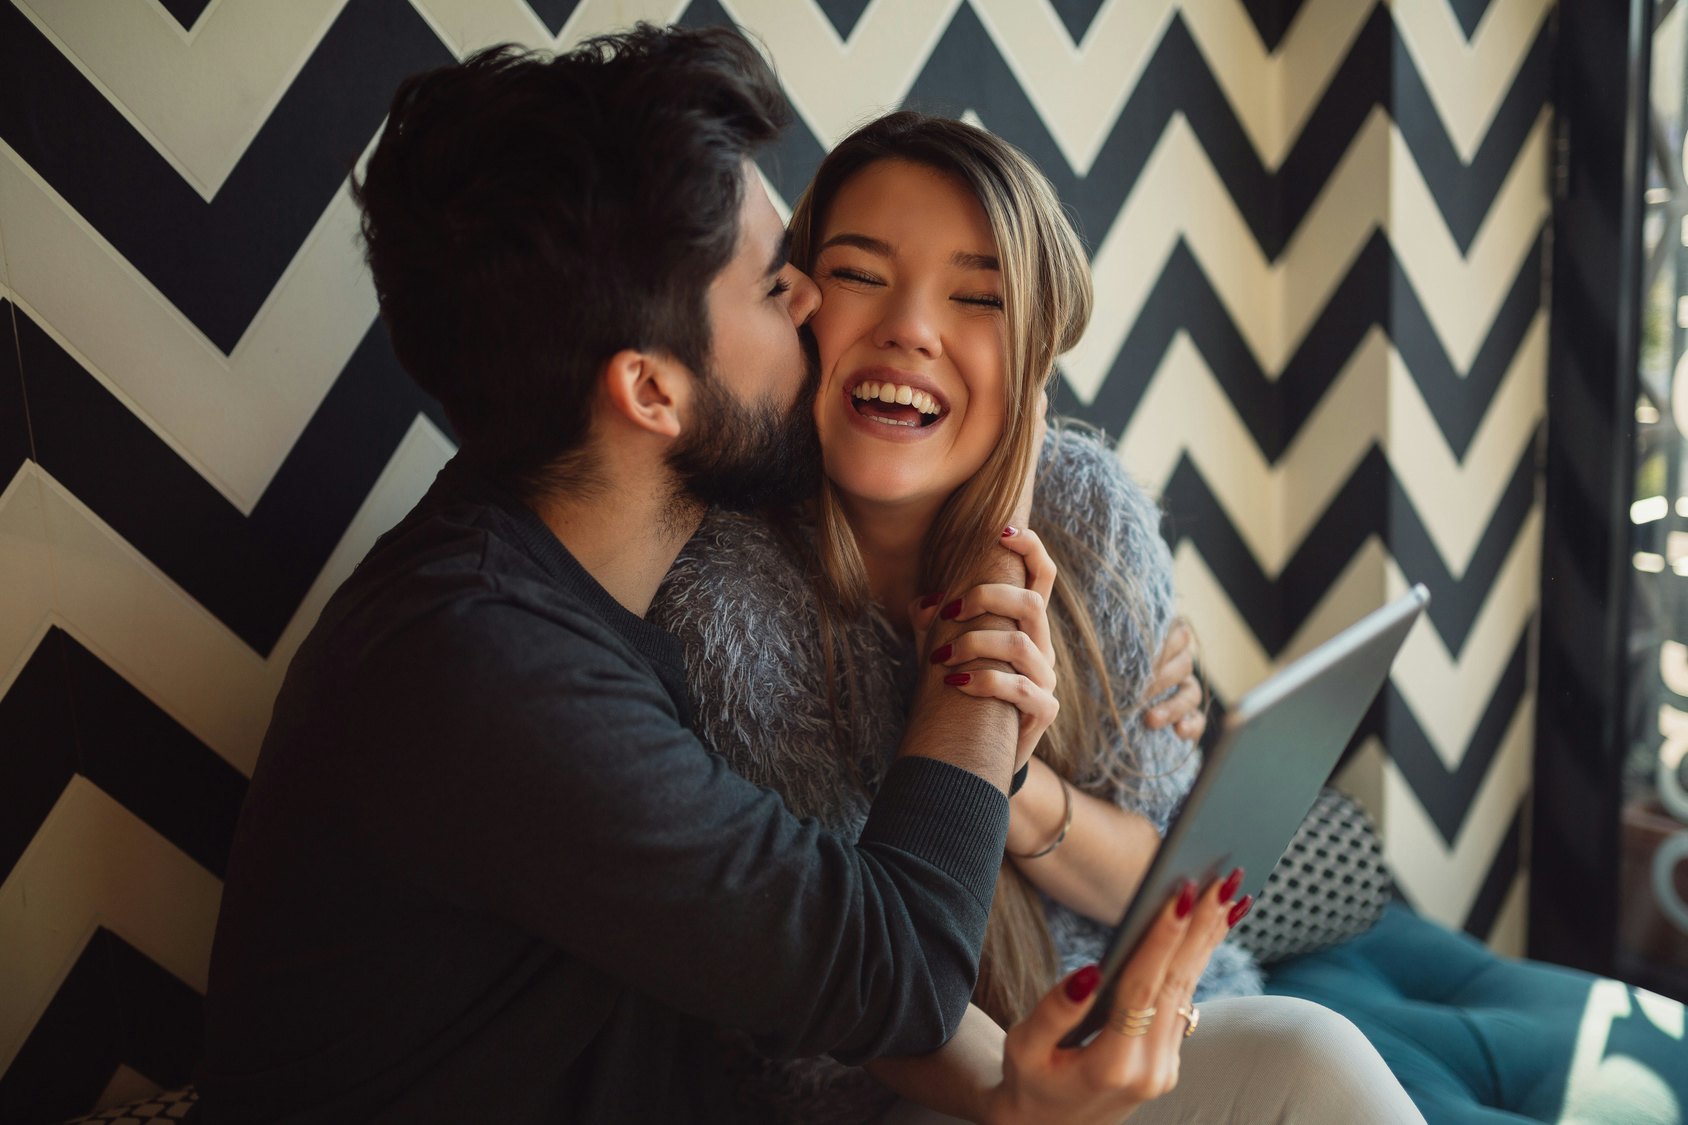 5 love languages quiz for dating couples online dating the app